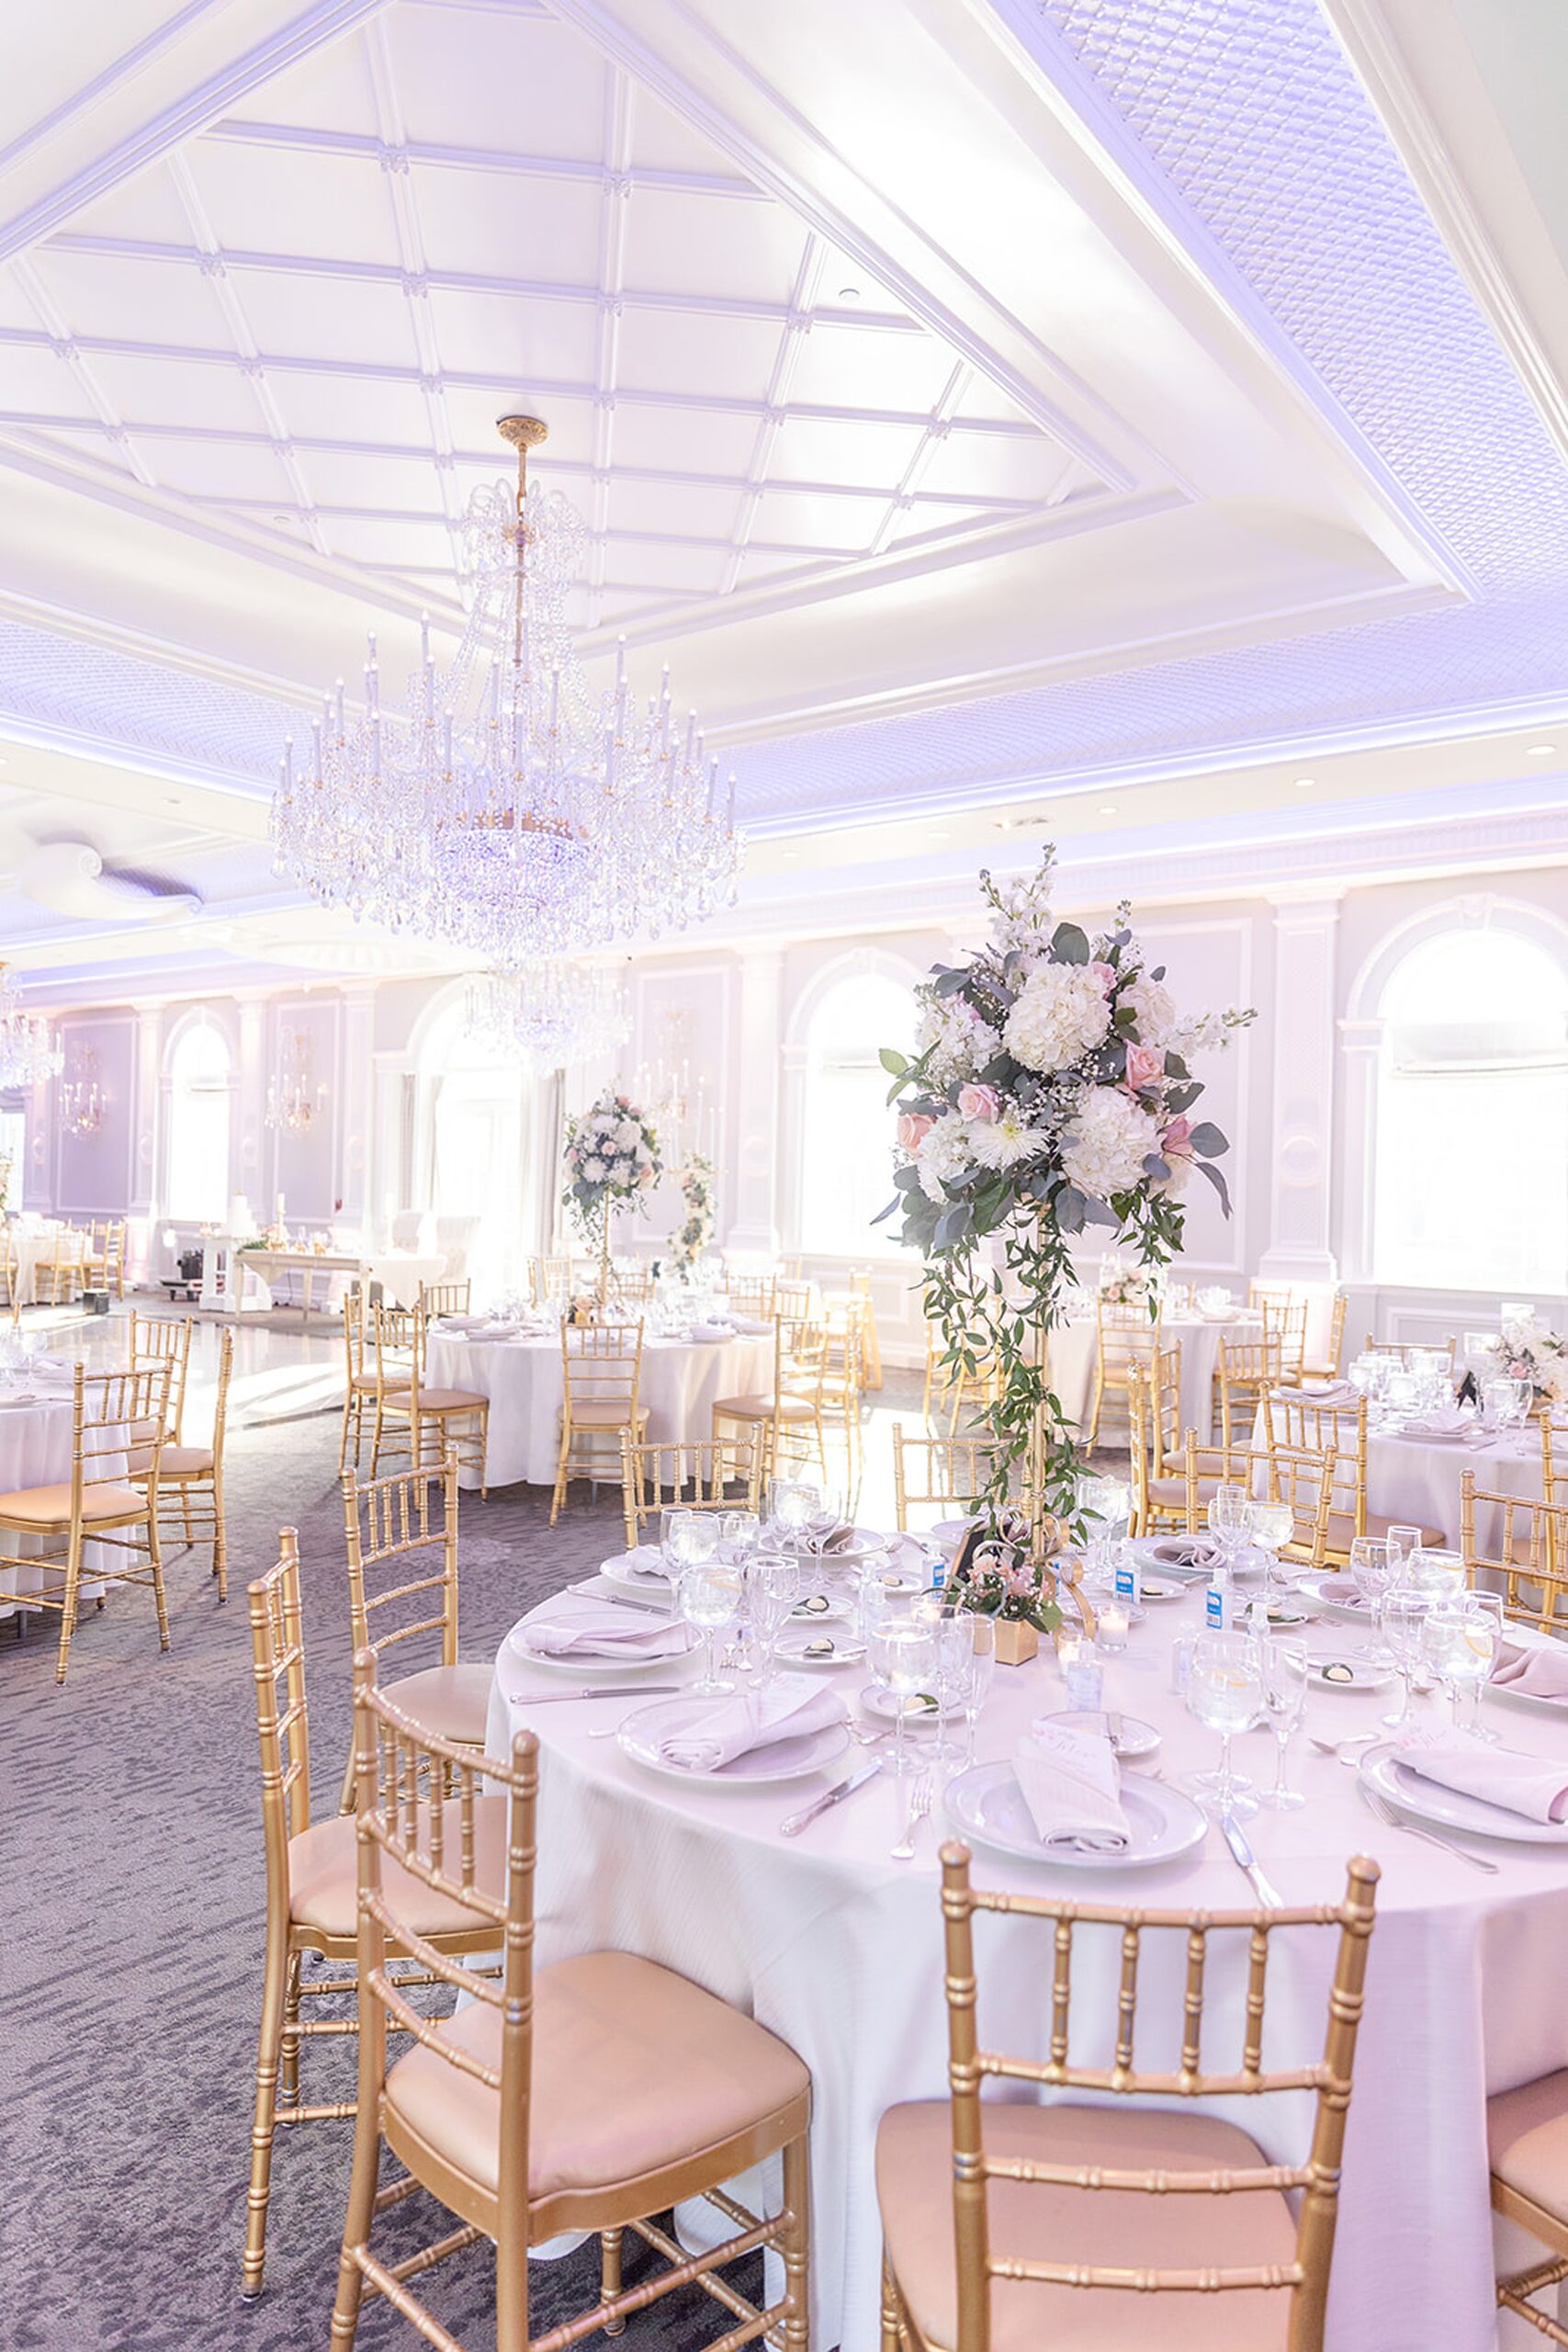 Details of a luxury ballroom wedding reception with many windows and gold chairs